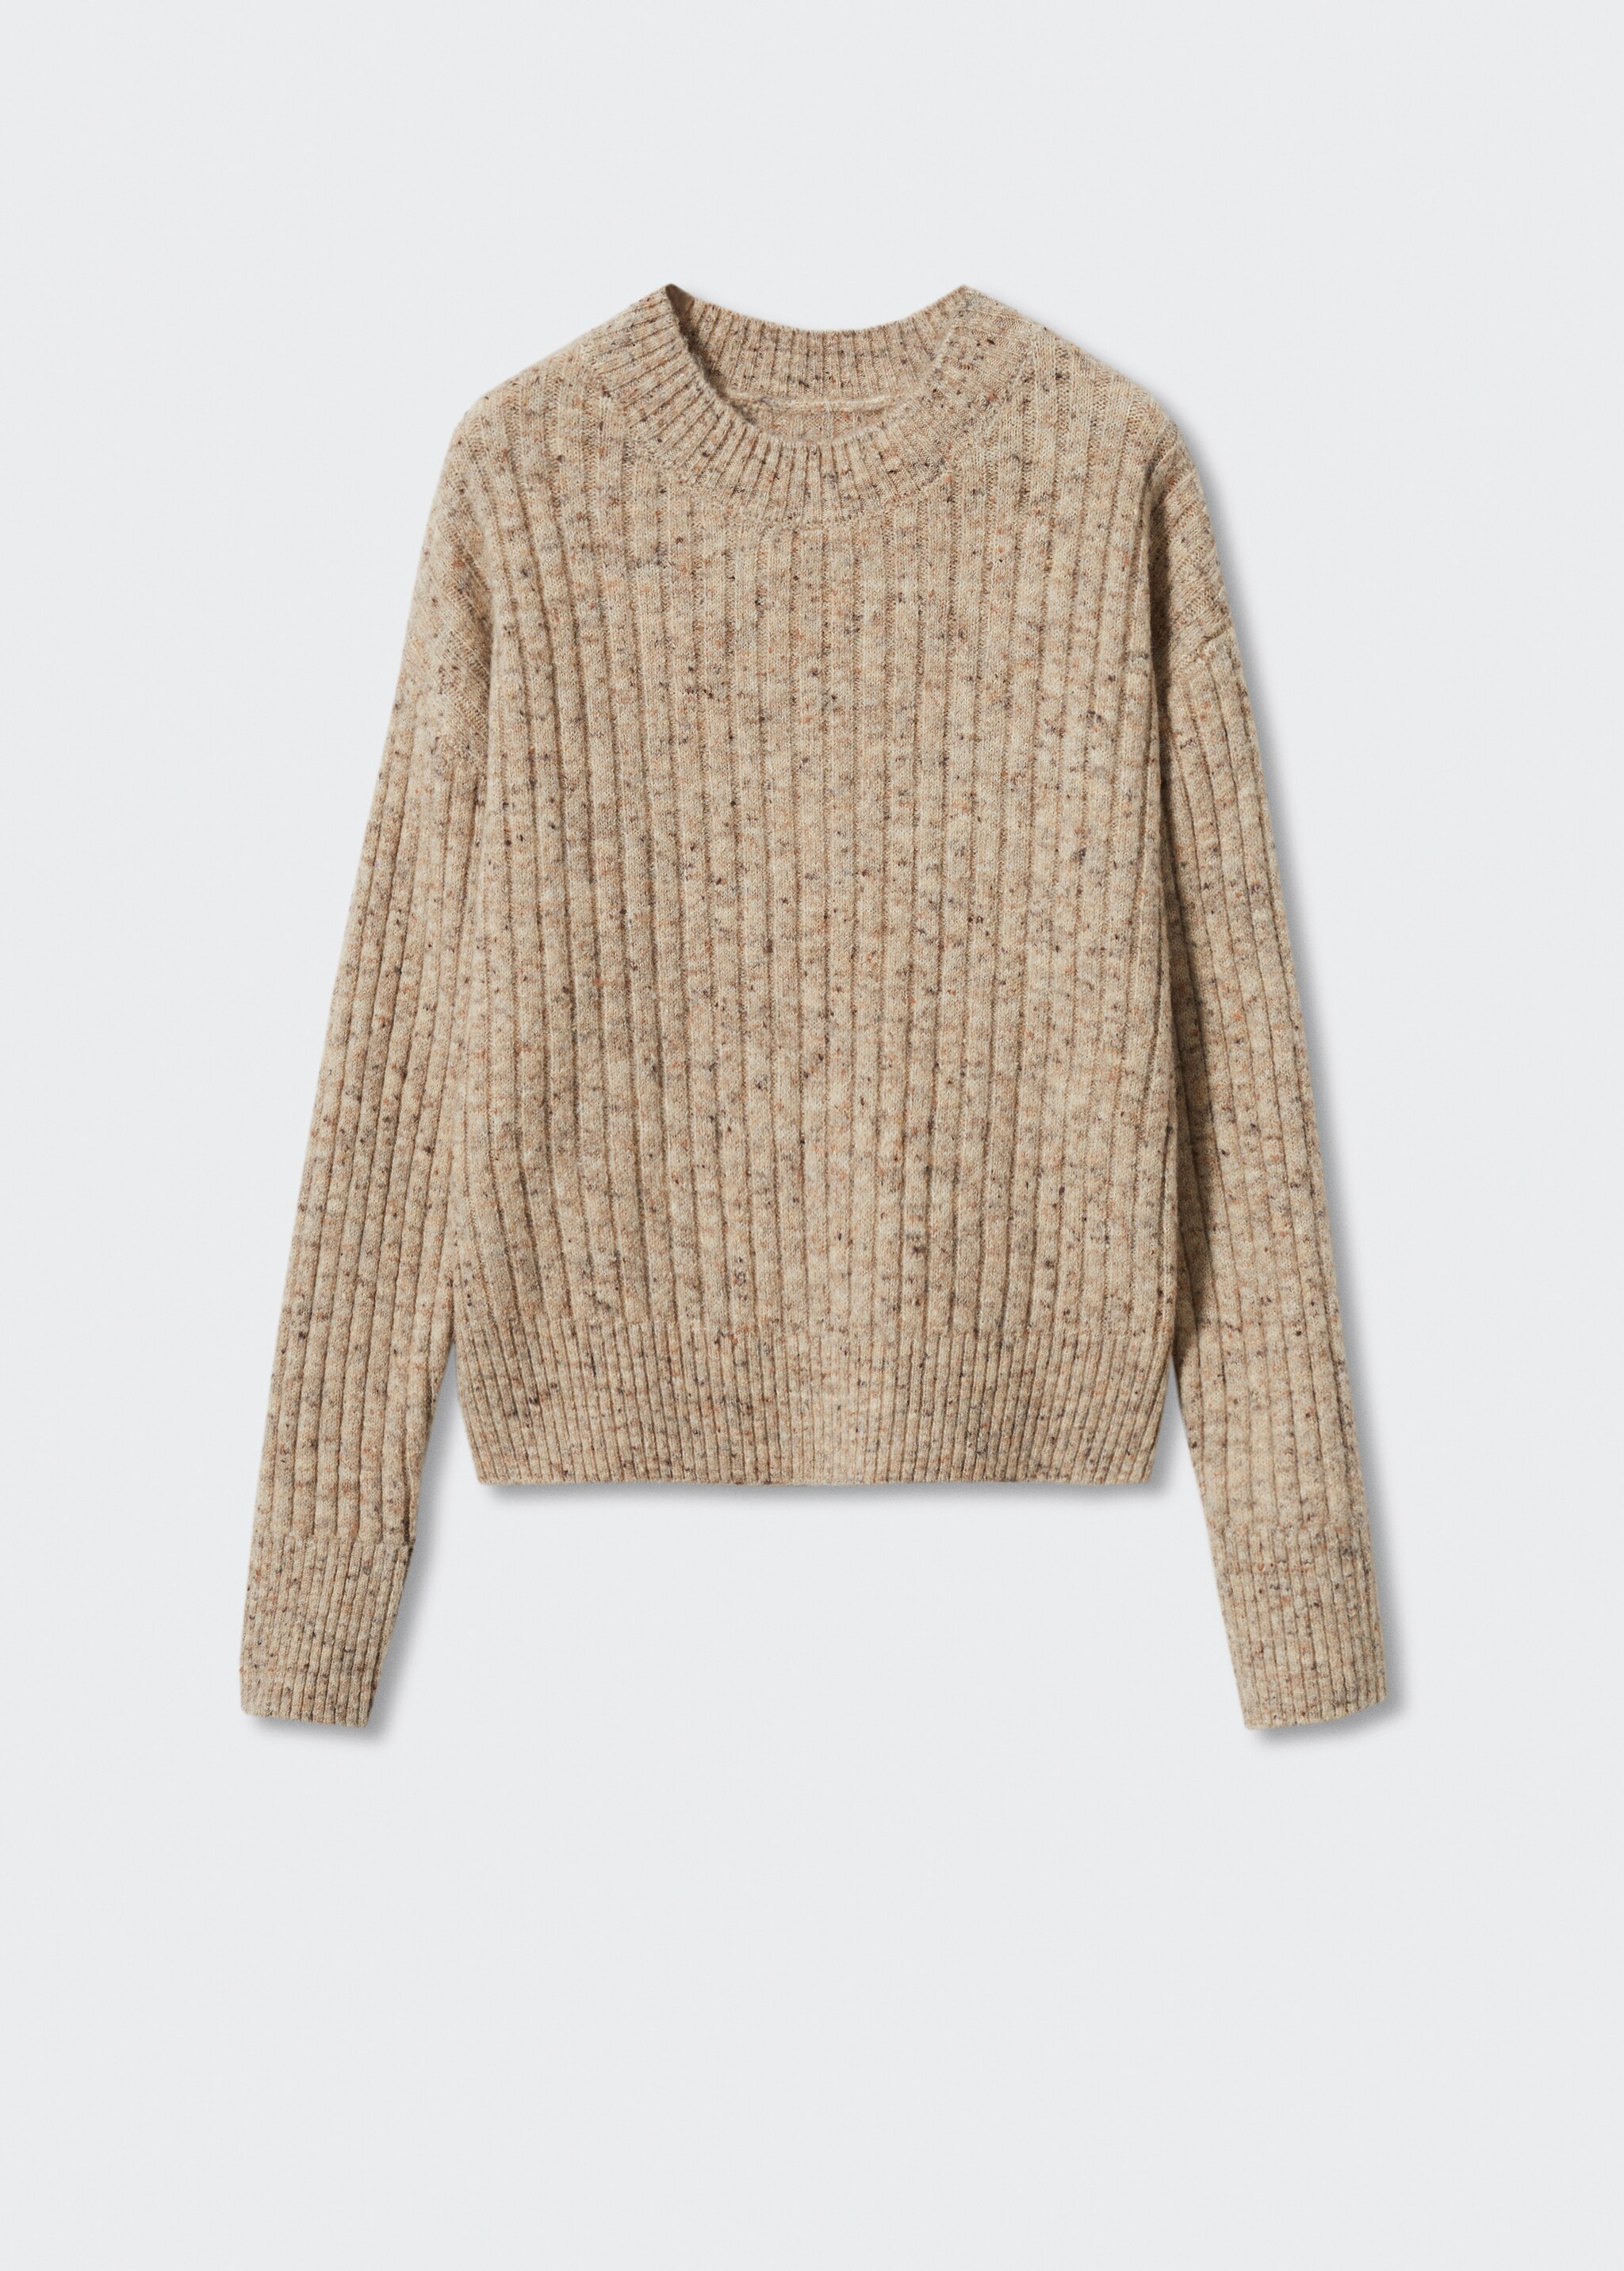 Mottled round-neck sweater - Article without model